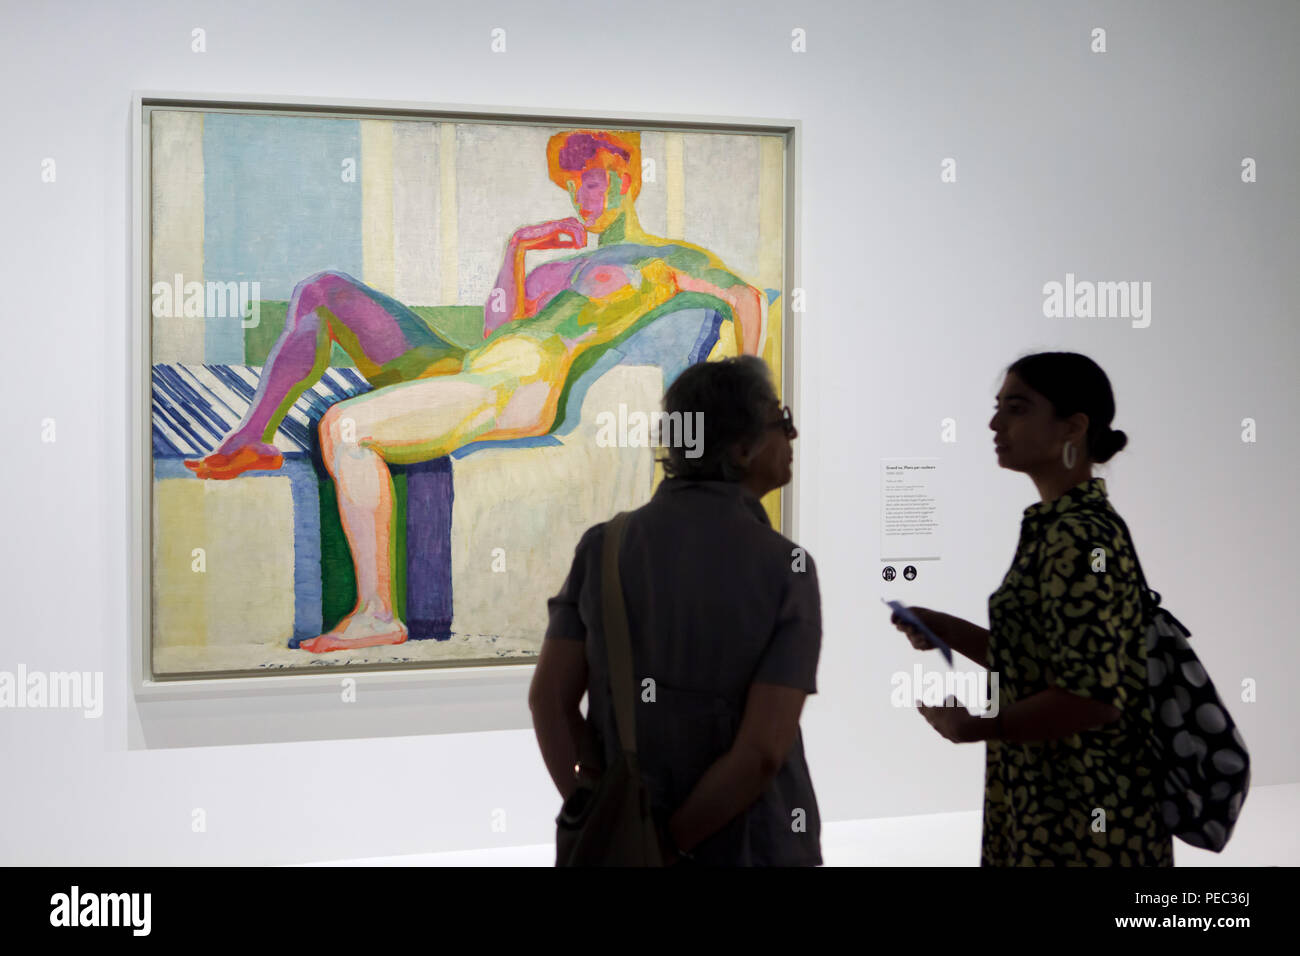 Visitors in front of the painting 'Large Nude' ('Planes by Colours') by Czech modernist painter František Kupka (1909-1910) displayed at his retrospective exhibition in the Grand Palais in Paris, France. The exhibition runs till 30 July 2018. Stock Photo